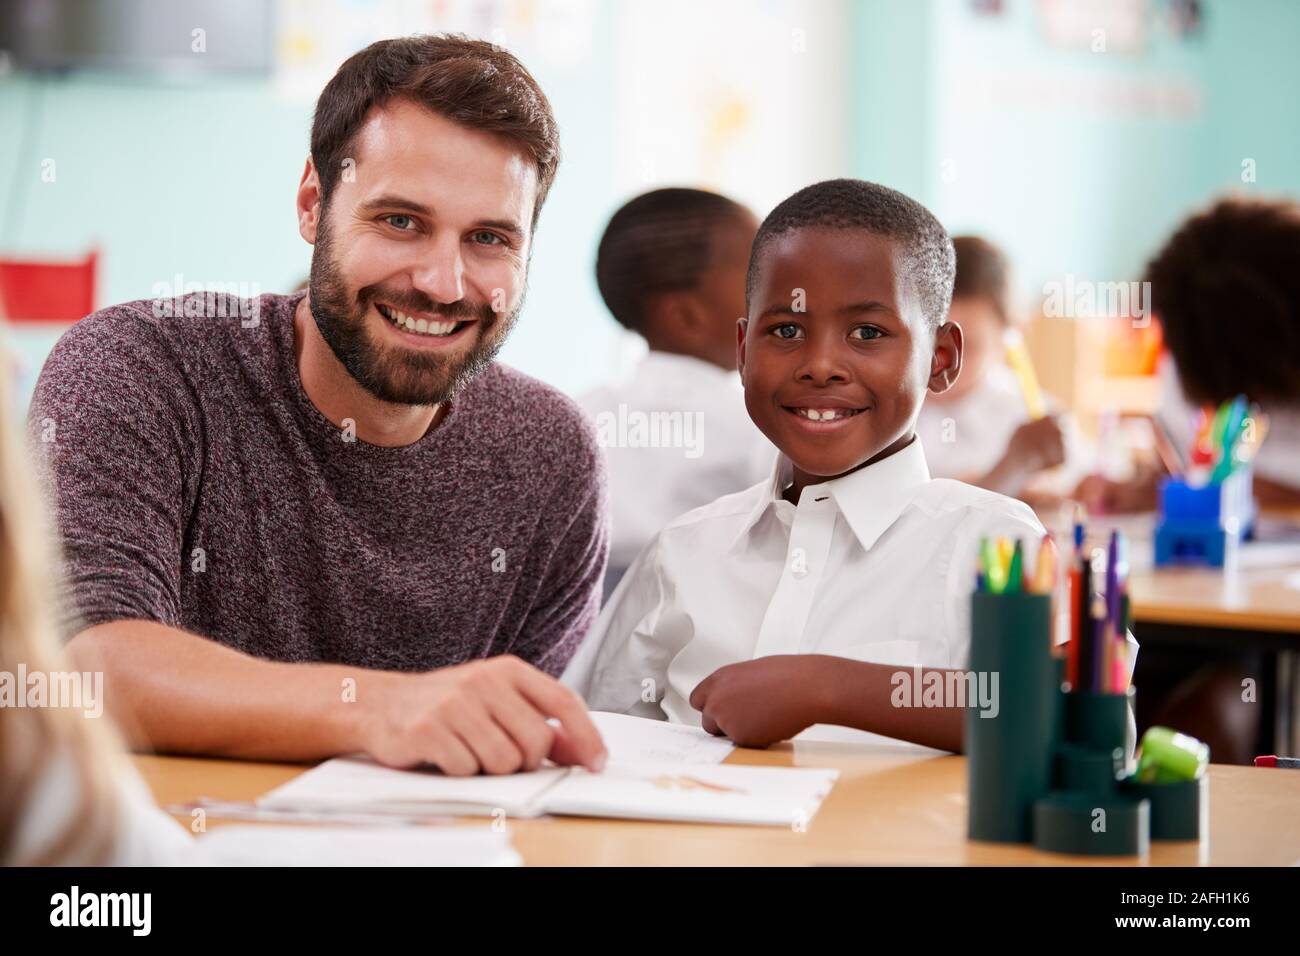 Portrait Of Elementary School Teacher Giving Male Pupil Wearing Uniform One To One Support In Class Stock Photo